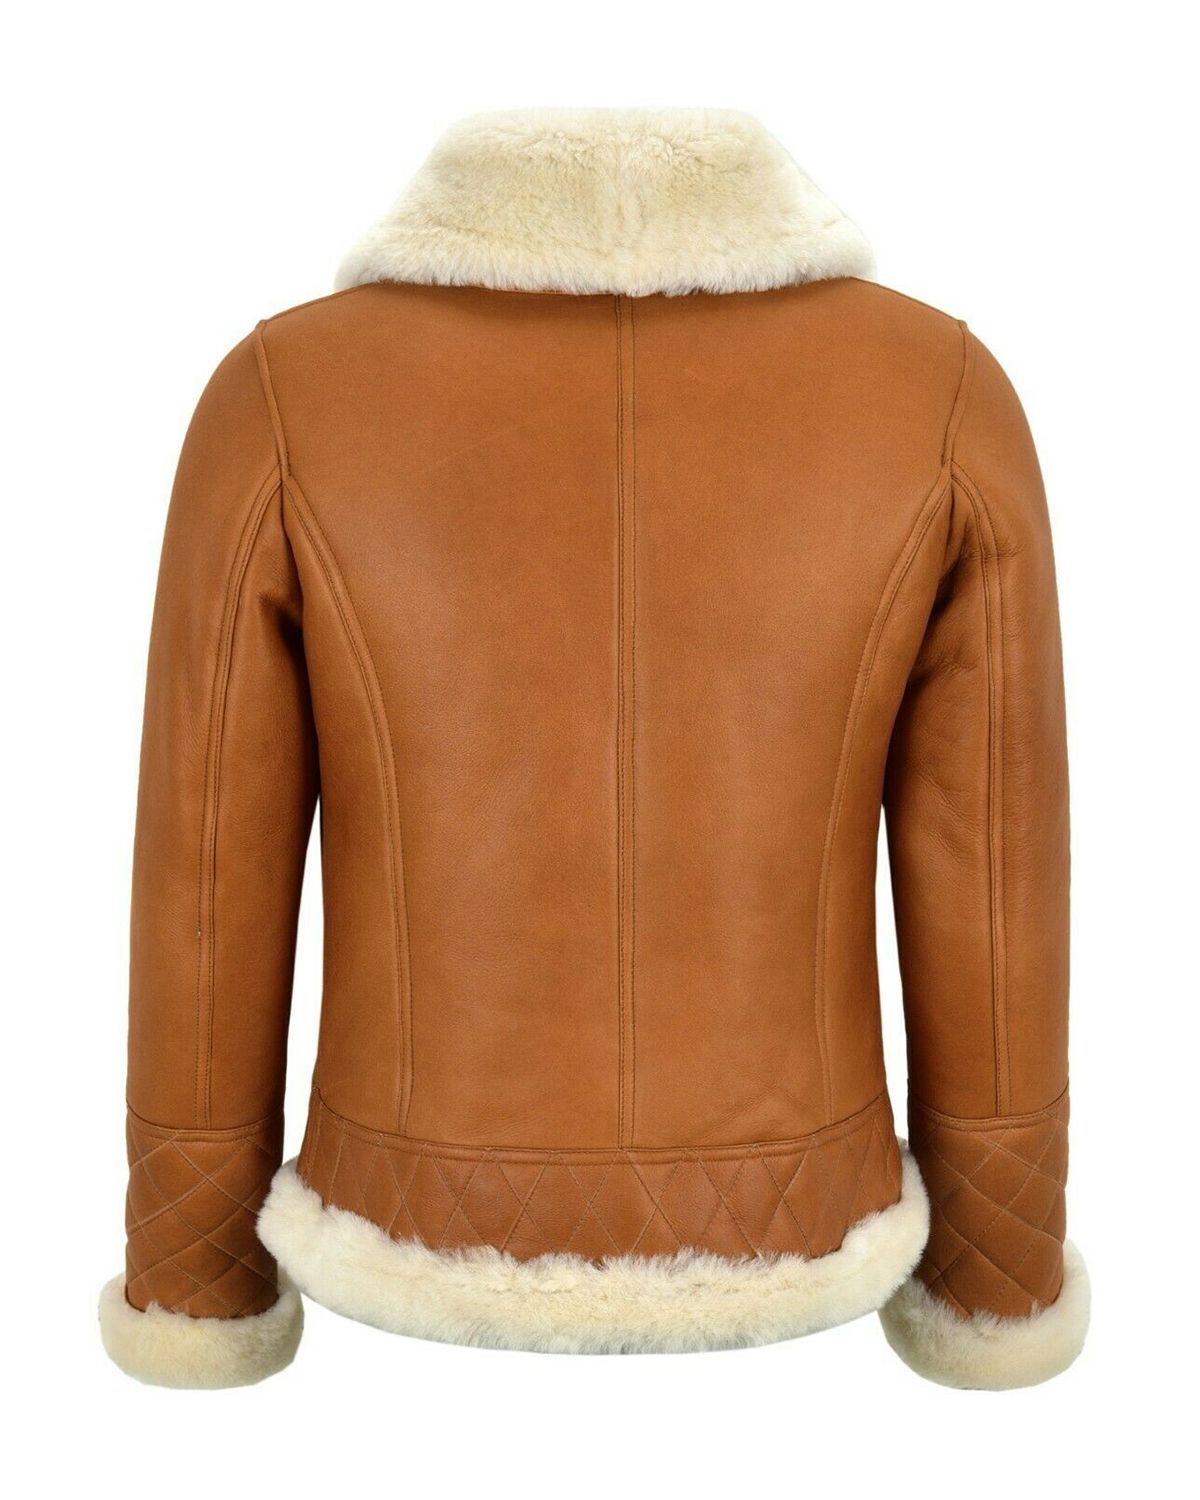 Scin Womens Tan Brown Bomber Real Sheepskin Leather Jacket by SCIN